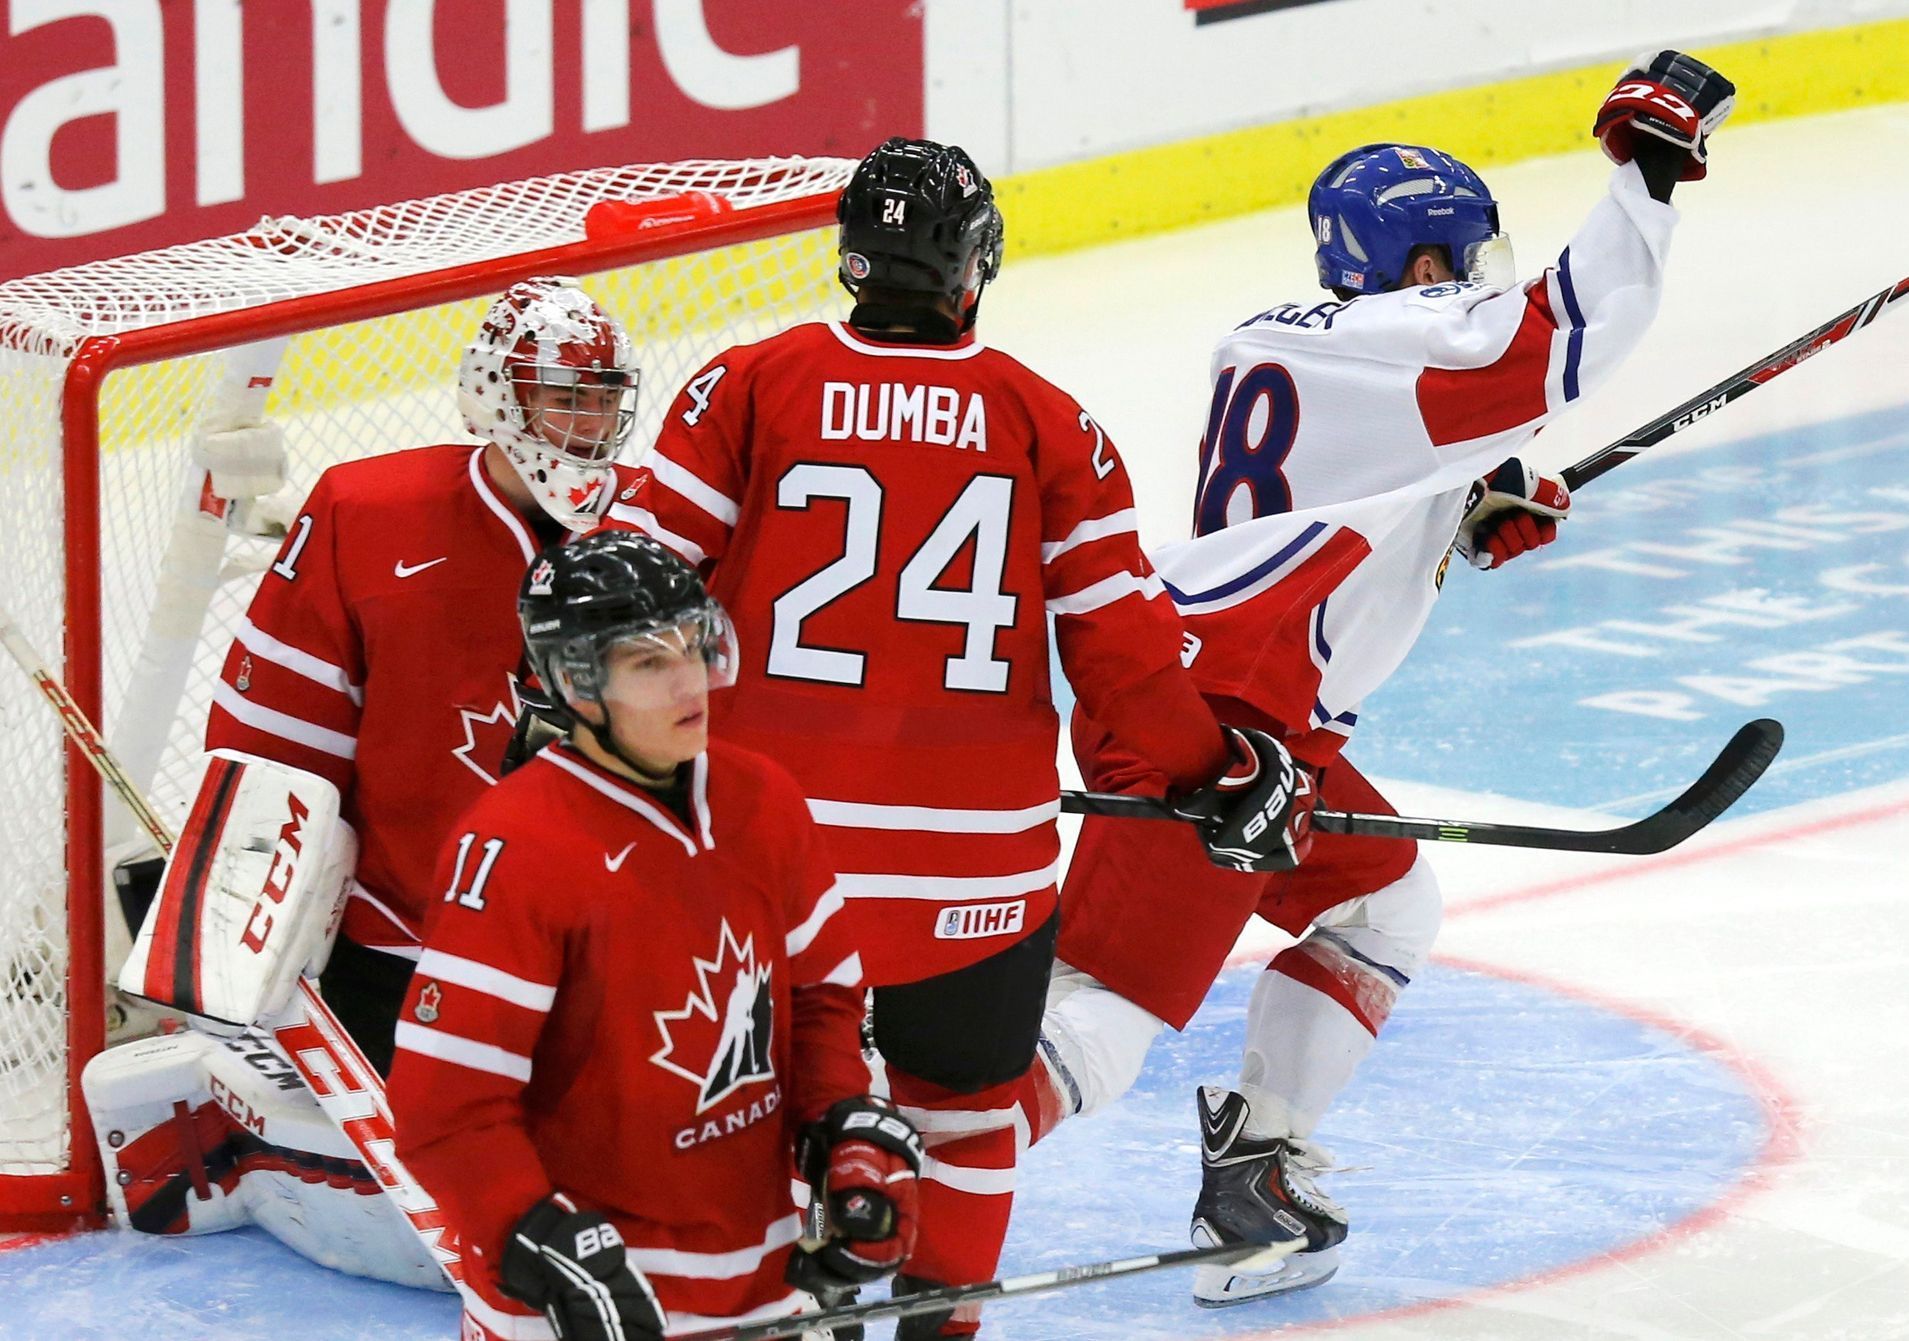 Czech Republic's Tomecek celebrates his goal in front of Canada's goalie Paterson, Horvat and Dumba during the third period of their IIHF World Junior Championship ice hockey game in Malmo